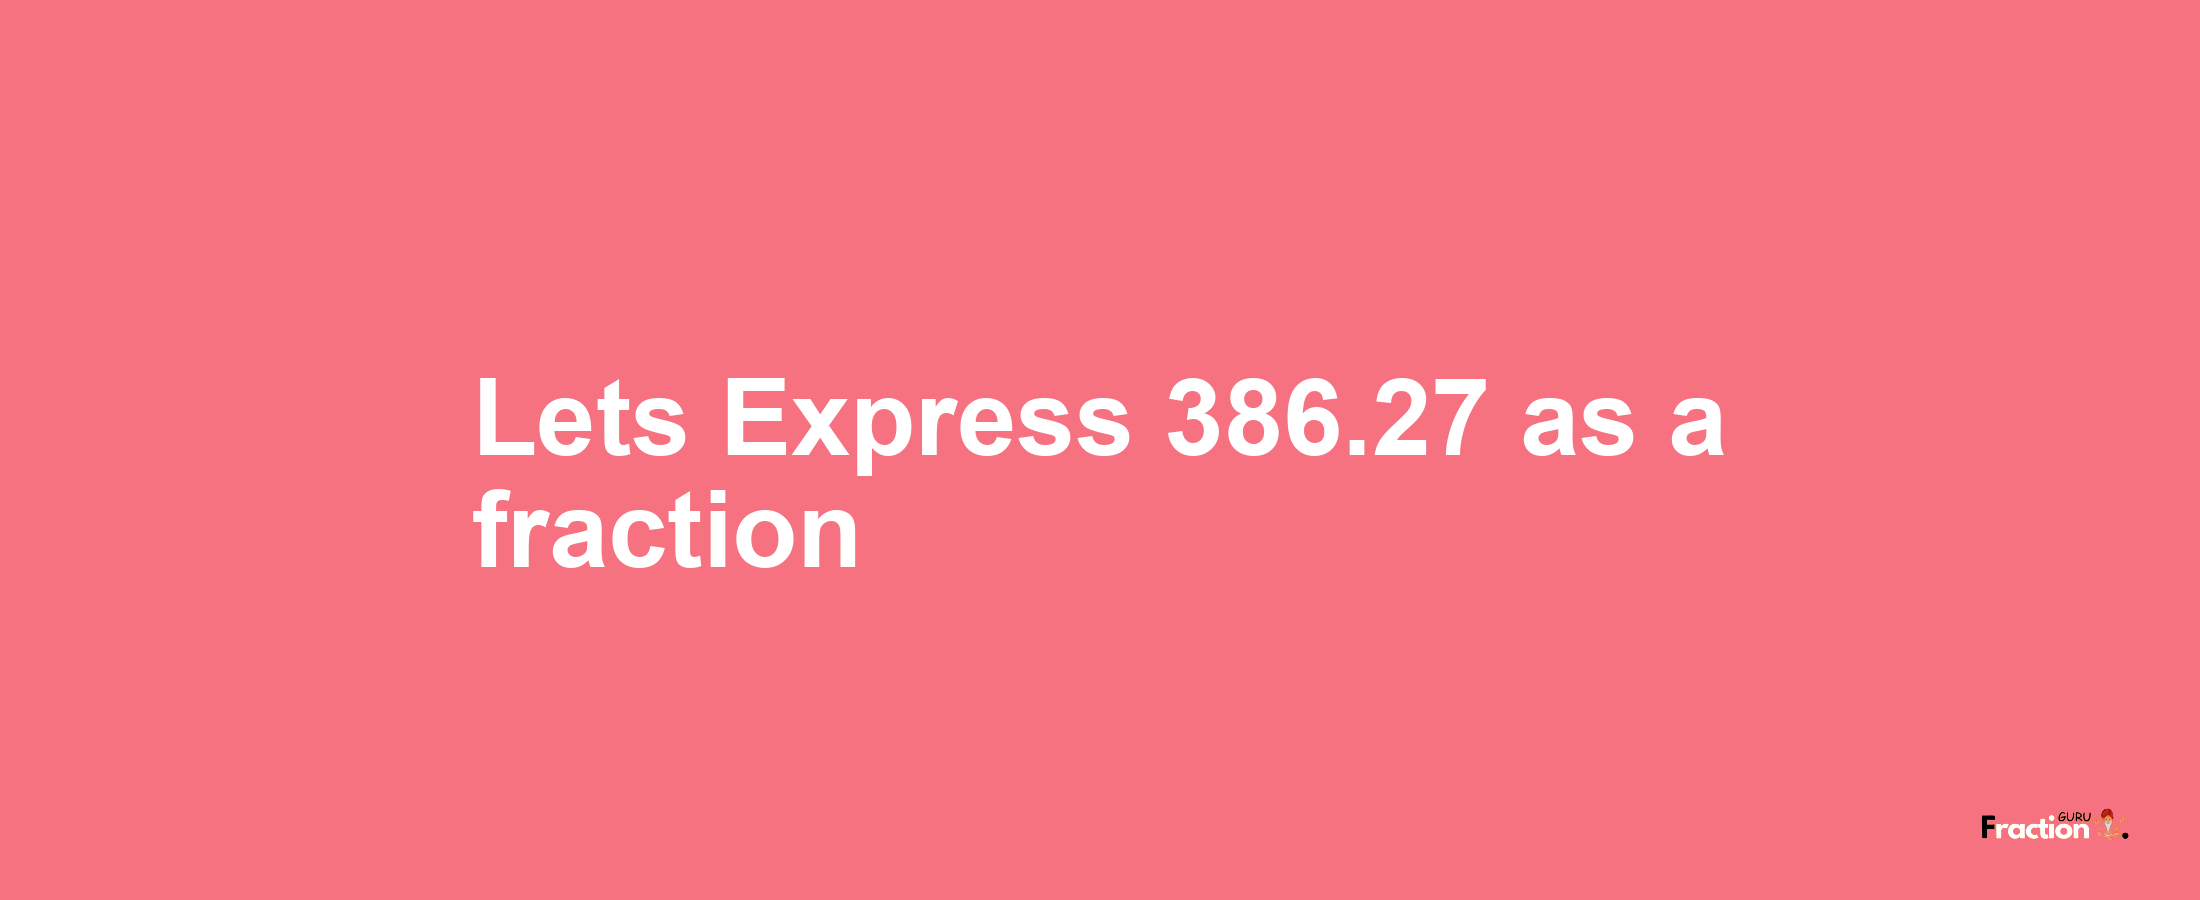 Lets Express 386.27 as afraction